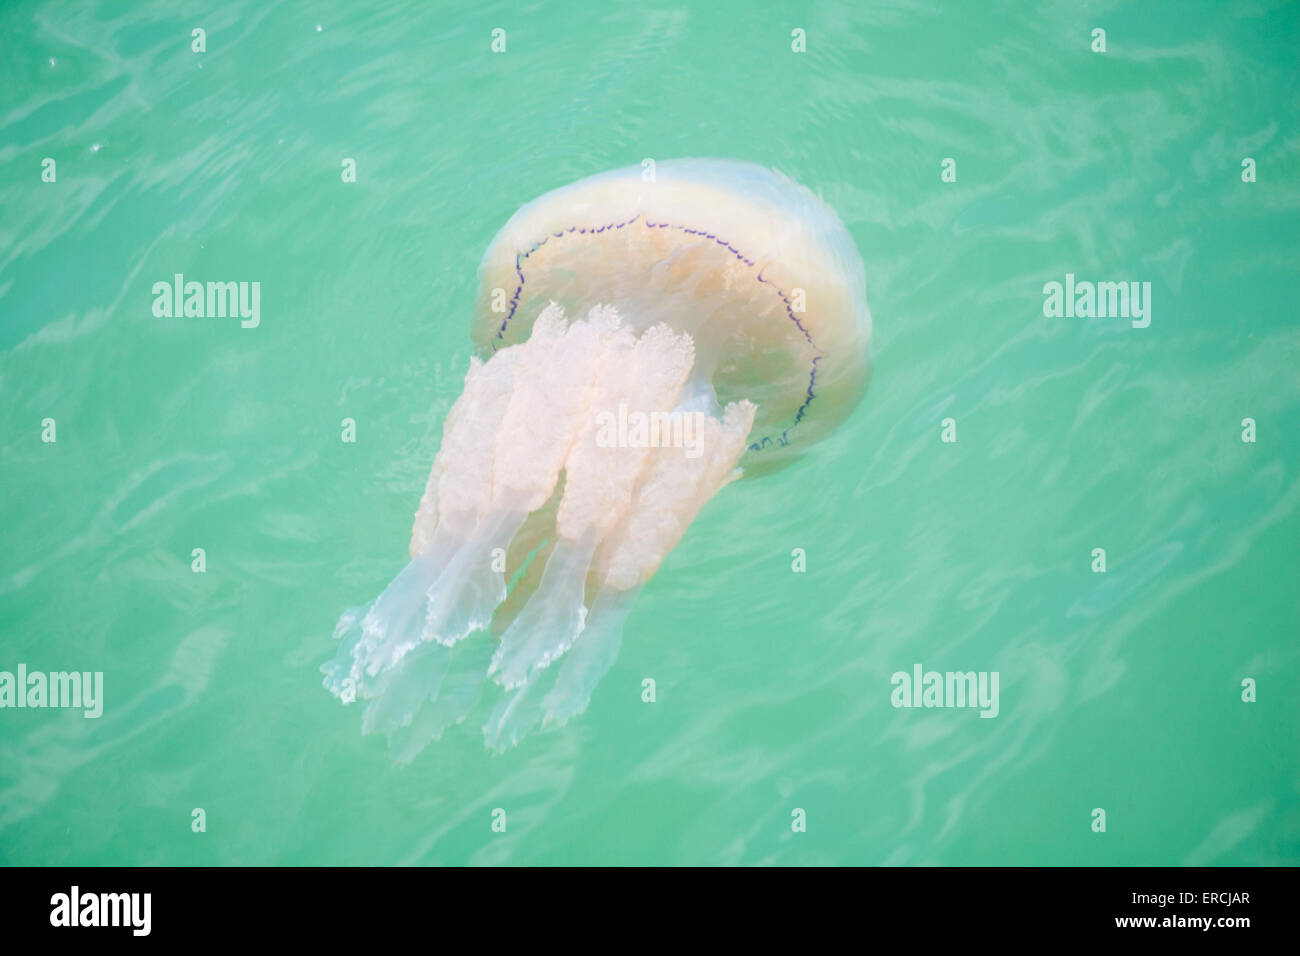 Warm weather brings out barrel jellyfish, Rhizostoma pulmo, swimming in the sea off Bournemouth Pier, Bournemouth, Dorset UK in May. Barrel jelly fish Stock Photo